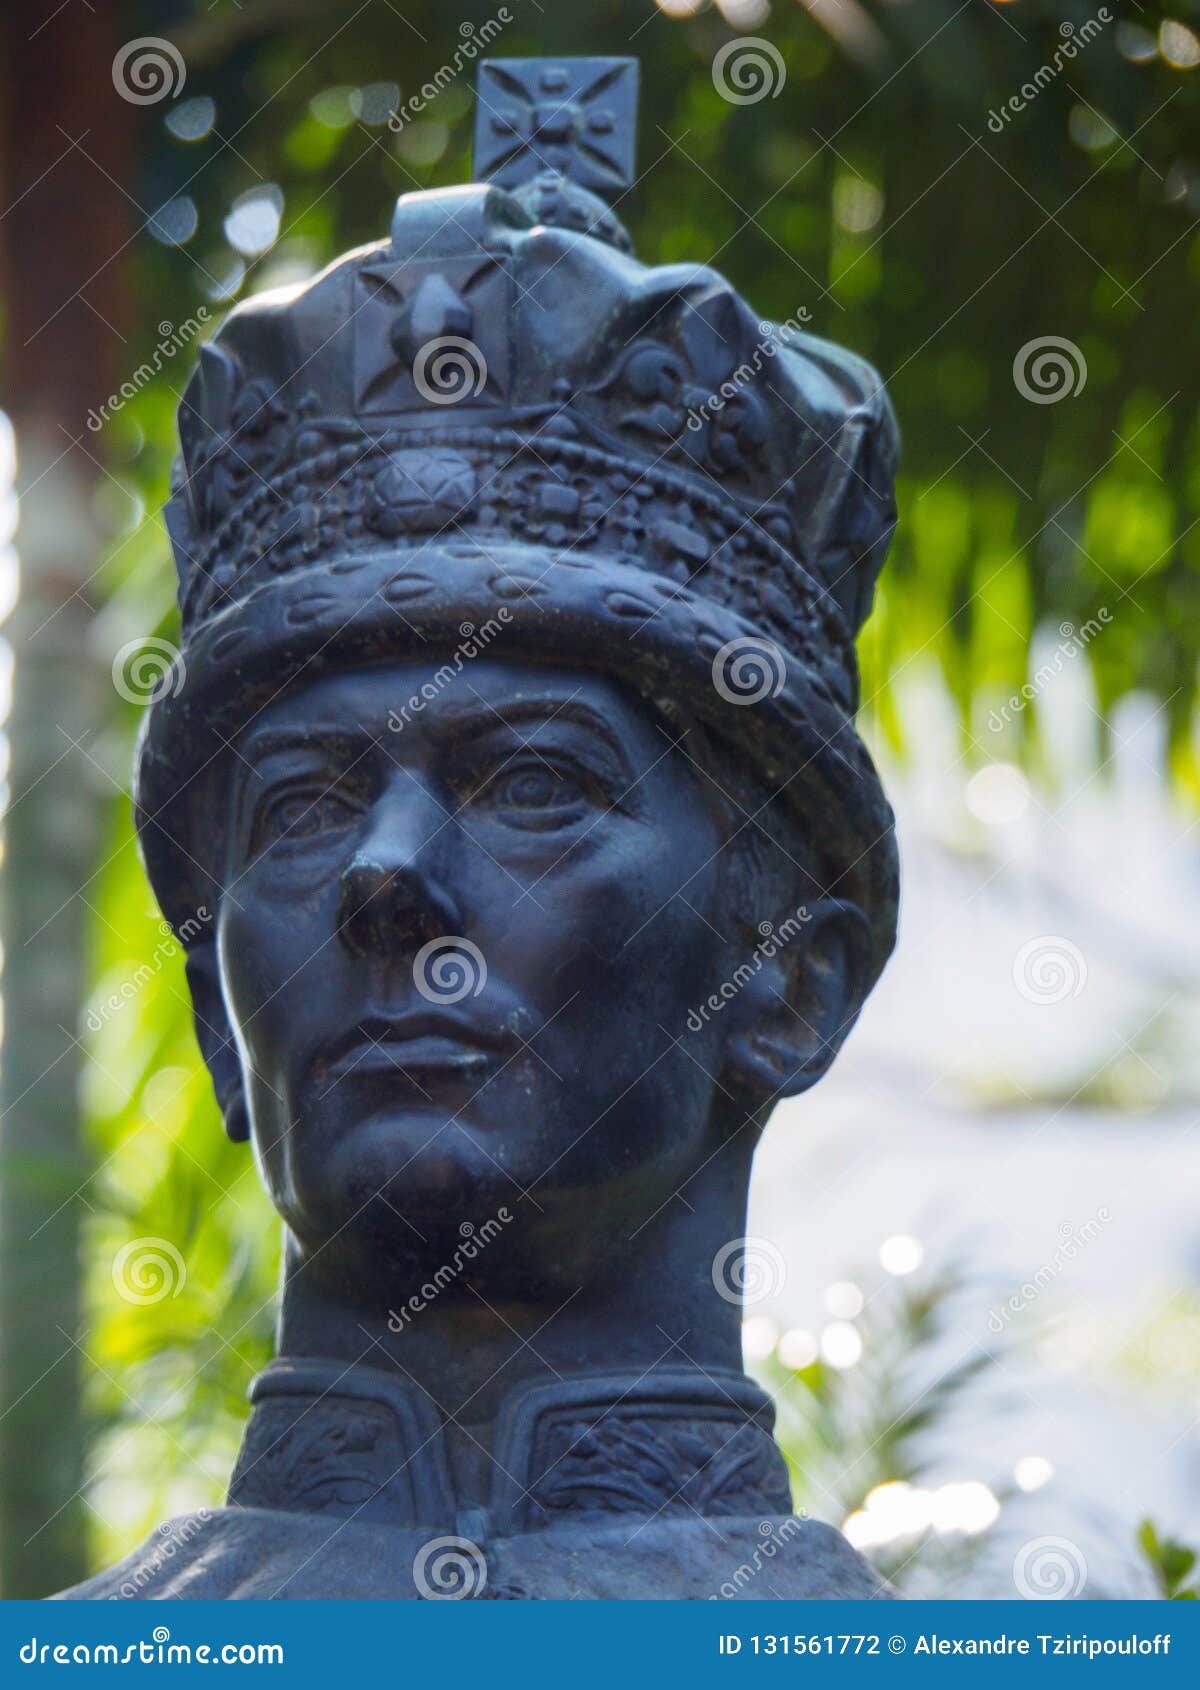 King George Vi Statue In Hong Kong Zoological And Botanical Gardens Editorial Photography Image Of Looking Kong 131561772